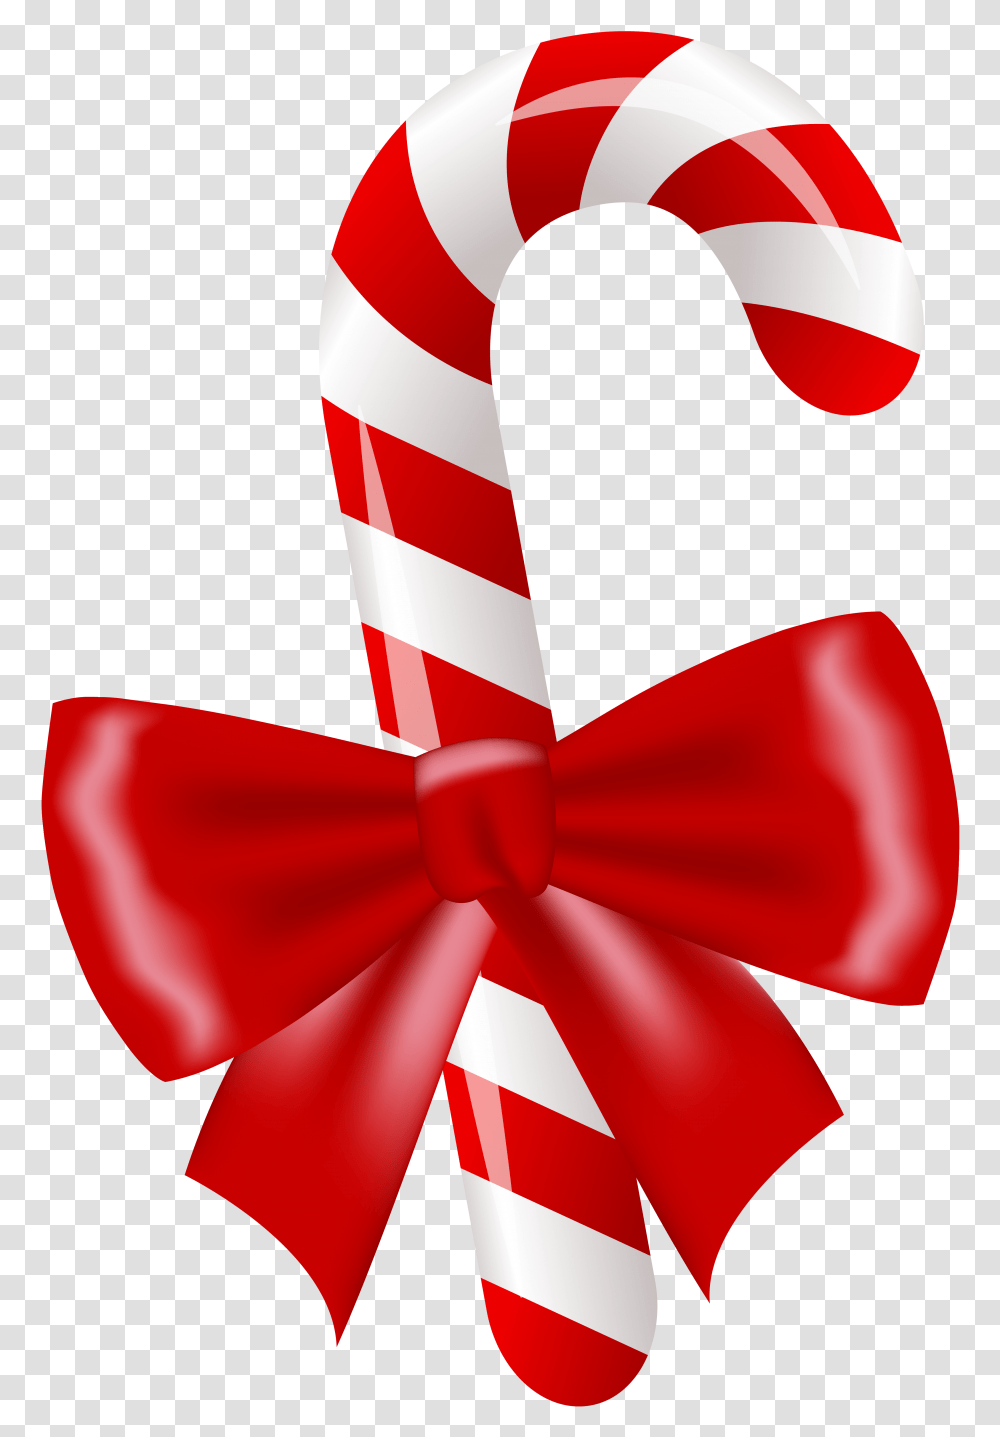 Christmas Candy Stick With Bow Image Christmas Candy Cane Clipart, Tie, Accessories, Accessory, Necktie Transparent Png